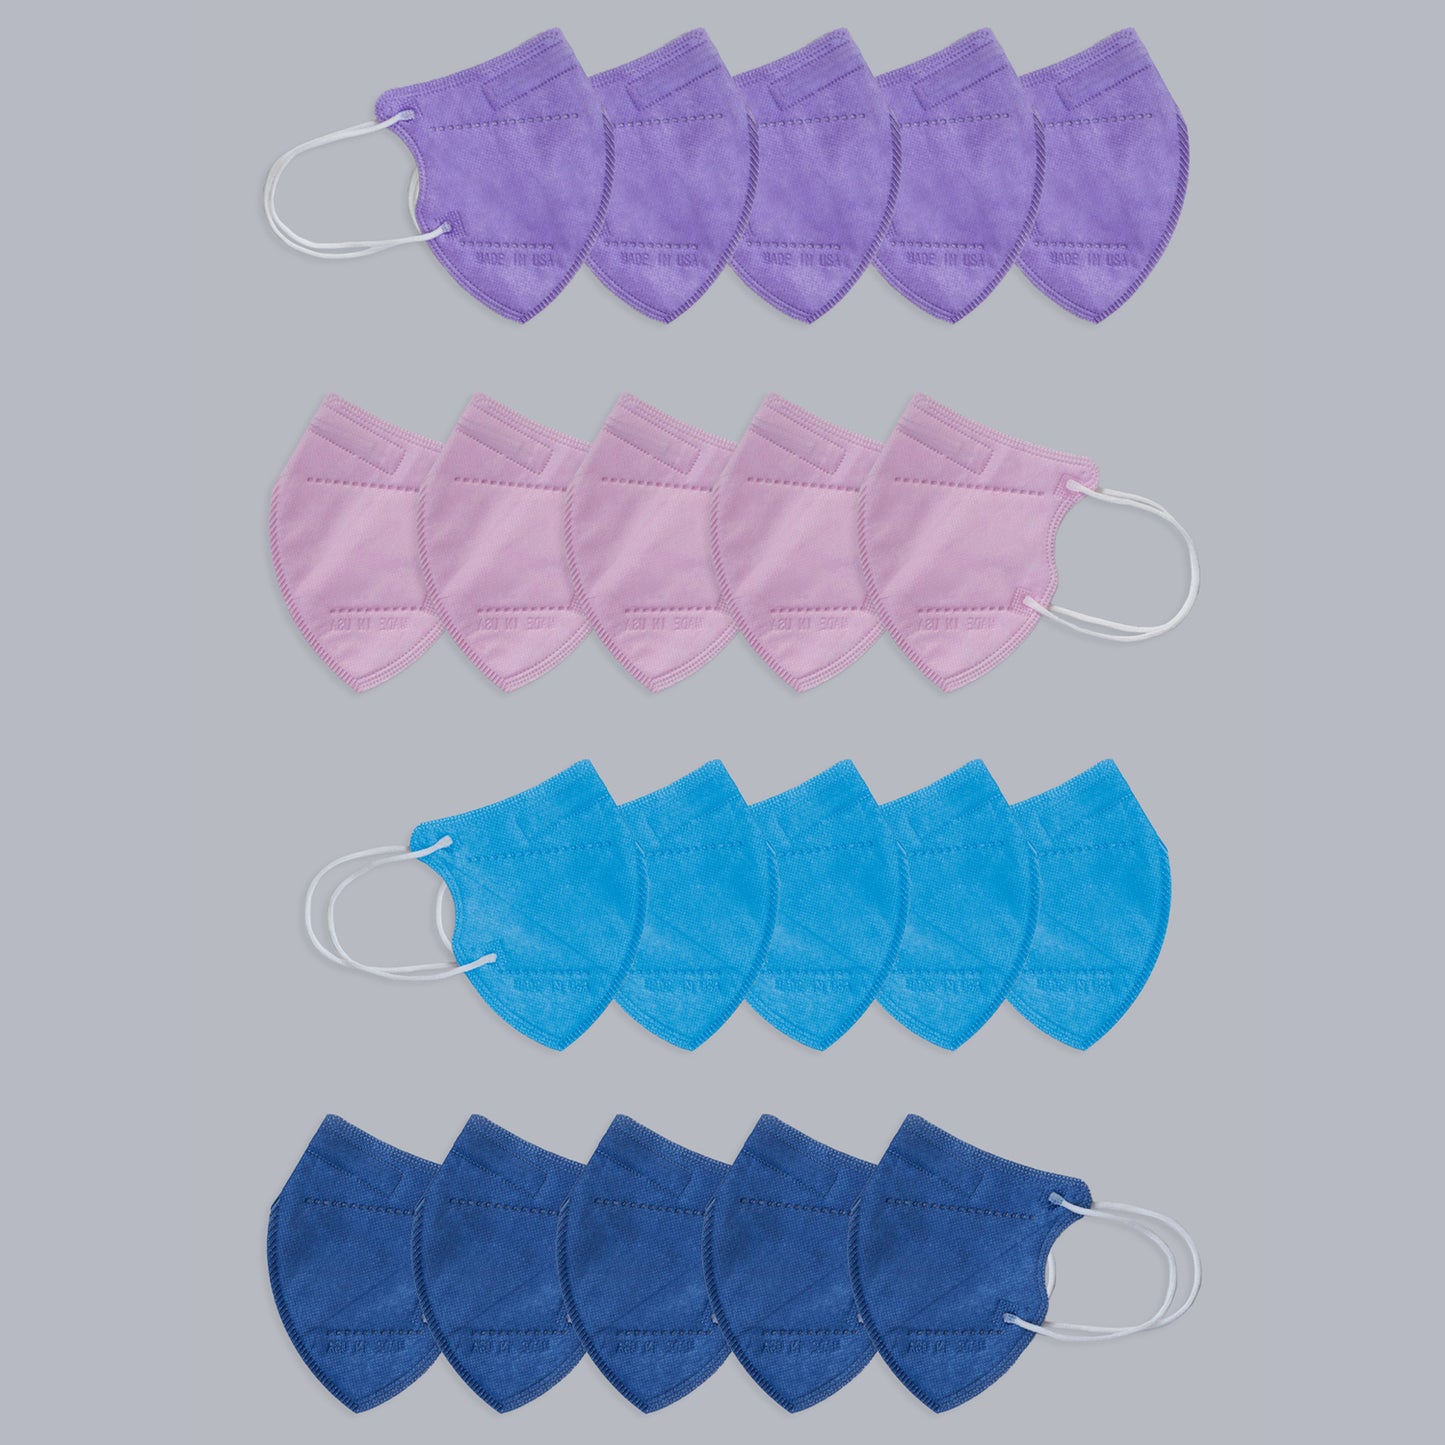 Kids’ Masks with KN95 Protection